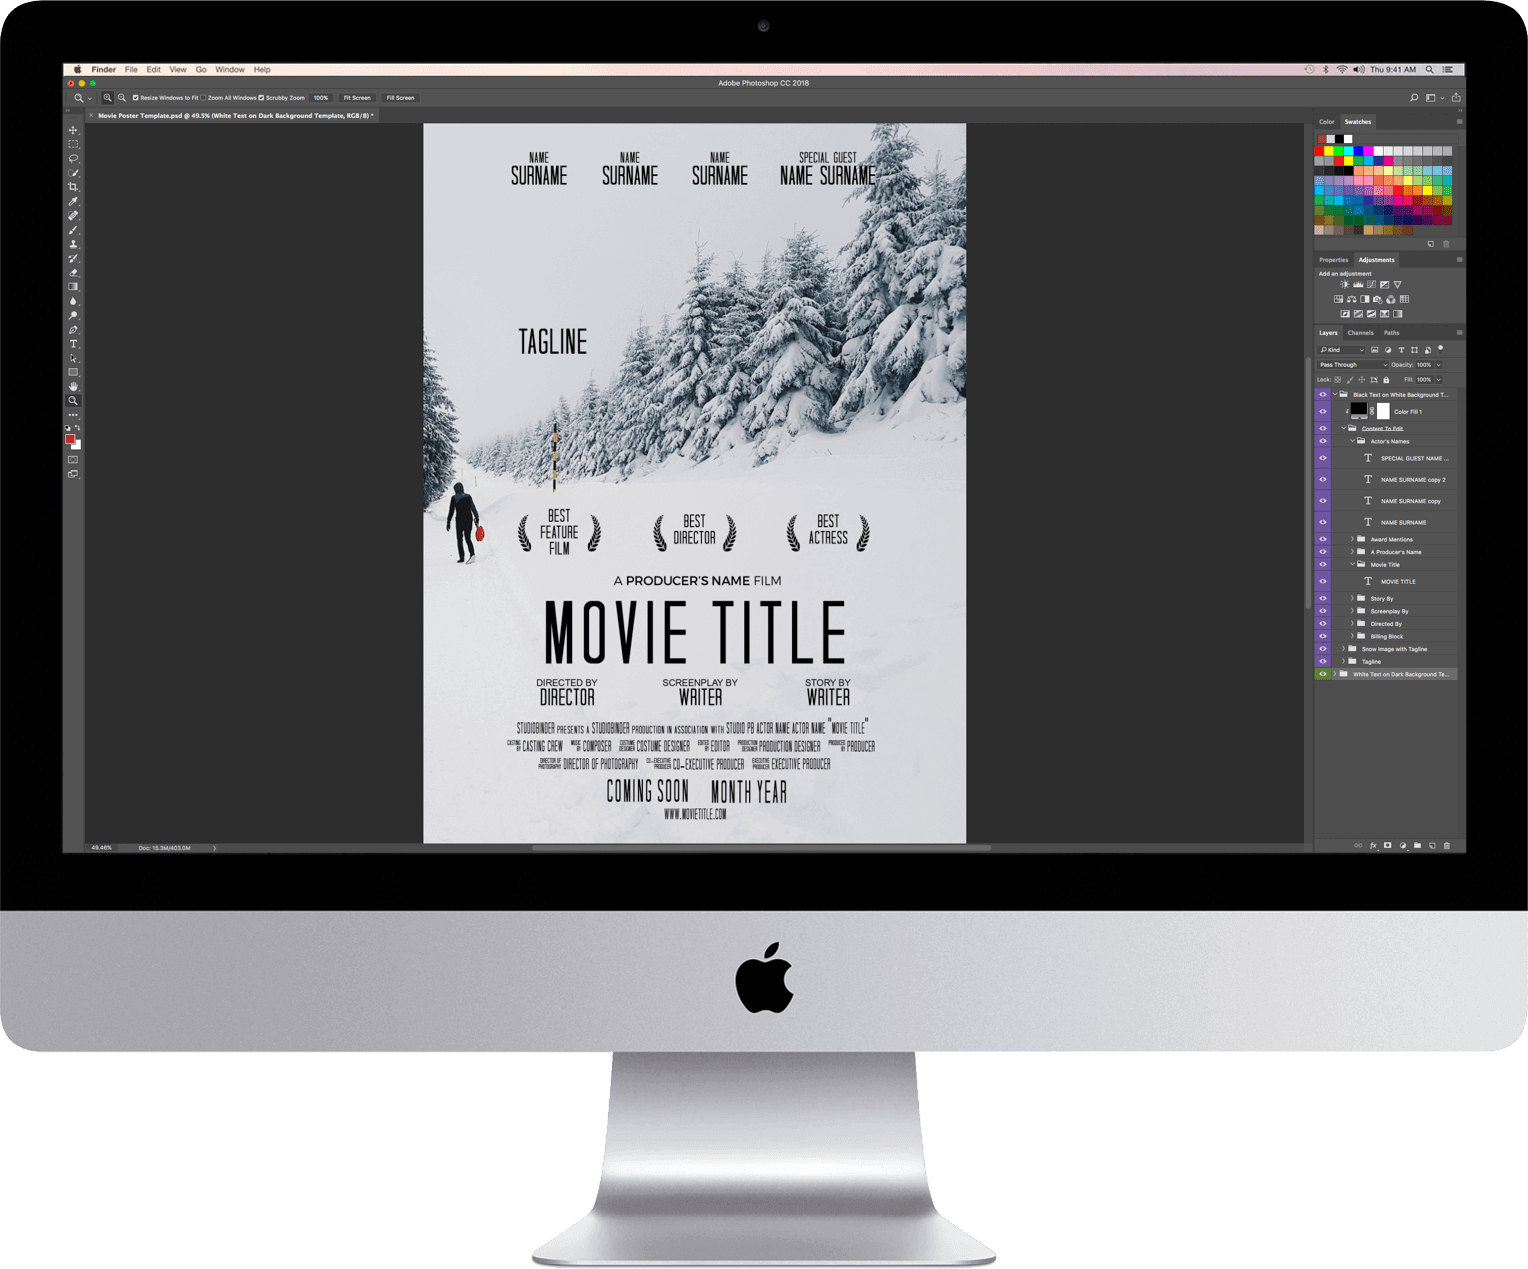 Download Your FREE Movie Poster Template for StudioBinder